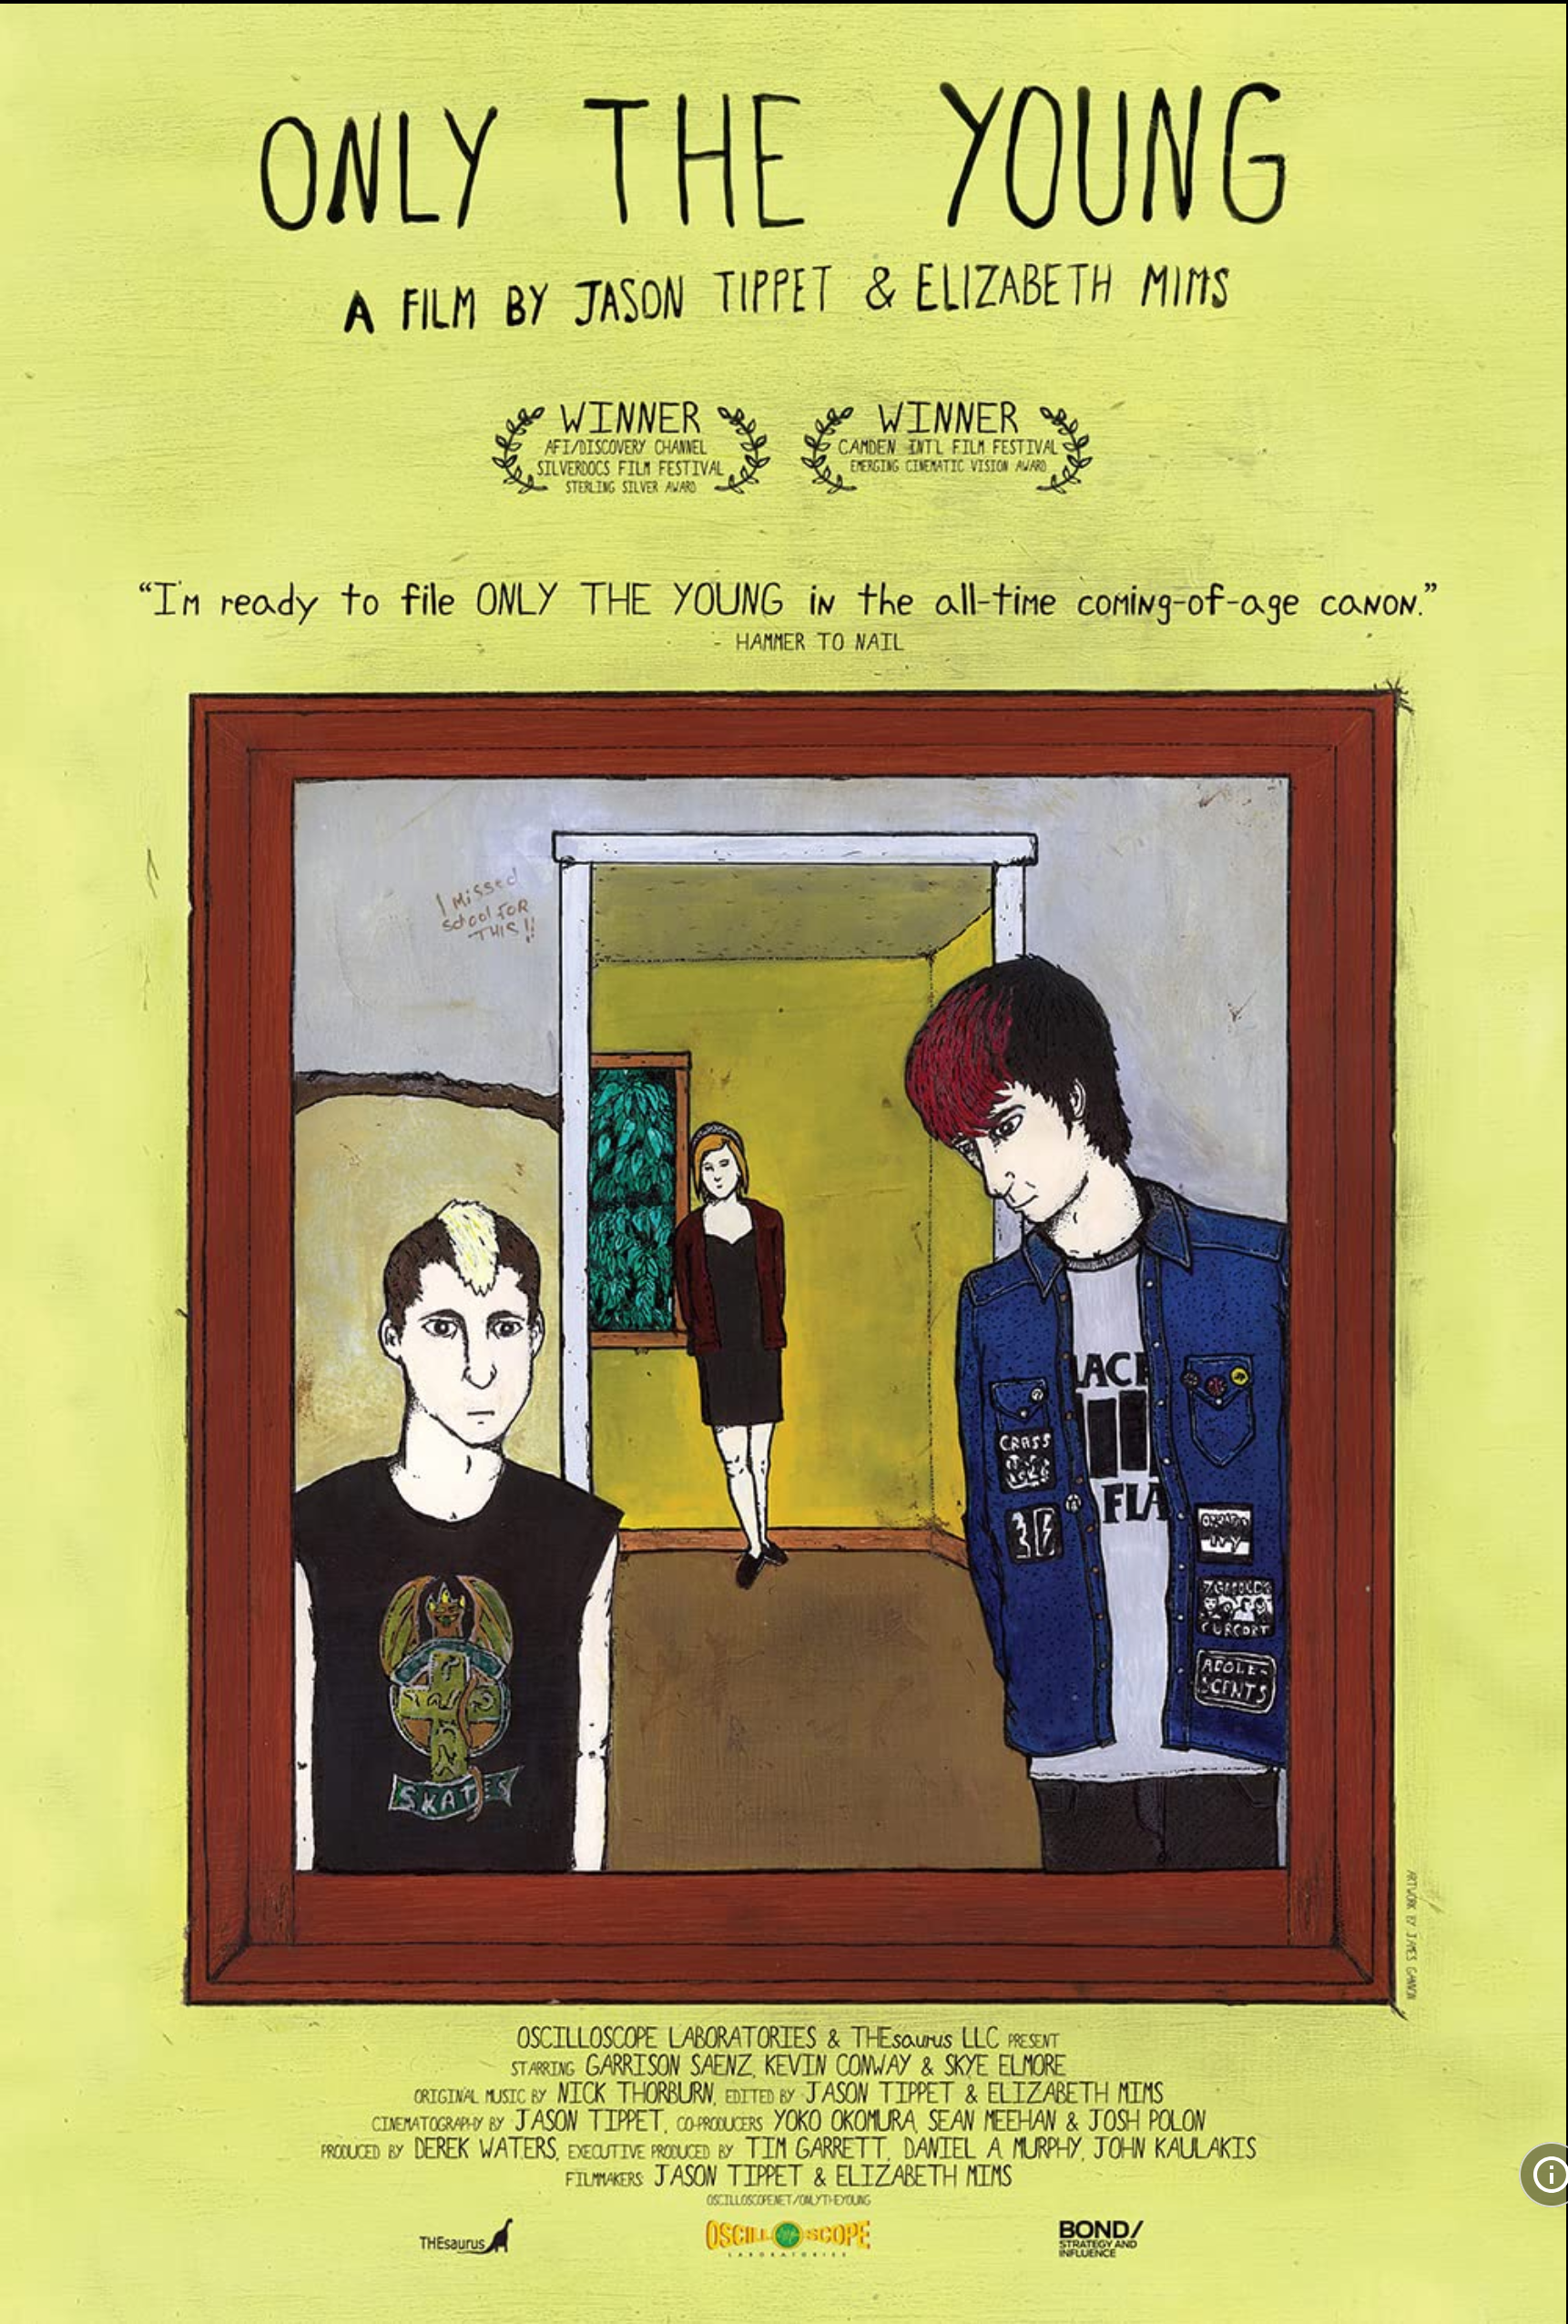 Movie Poster for ONLY THE YOUNG (2012)